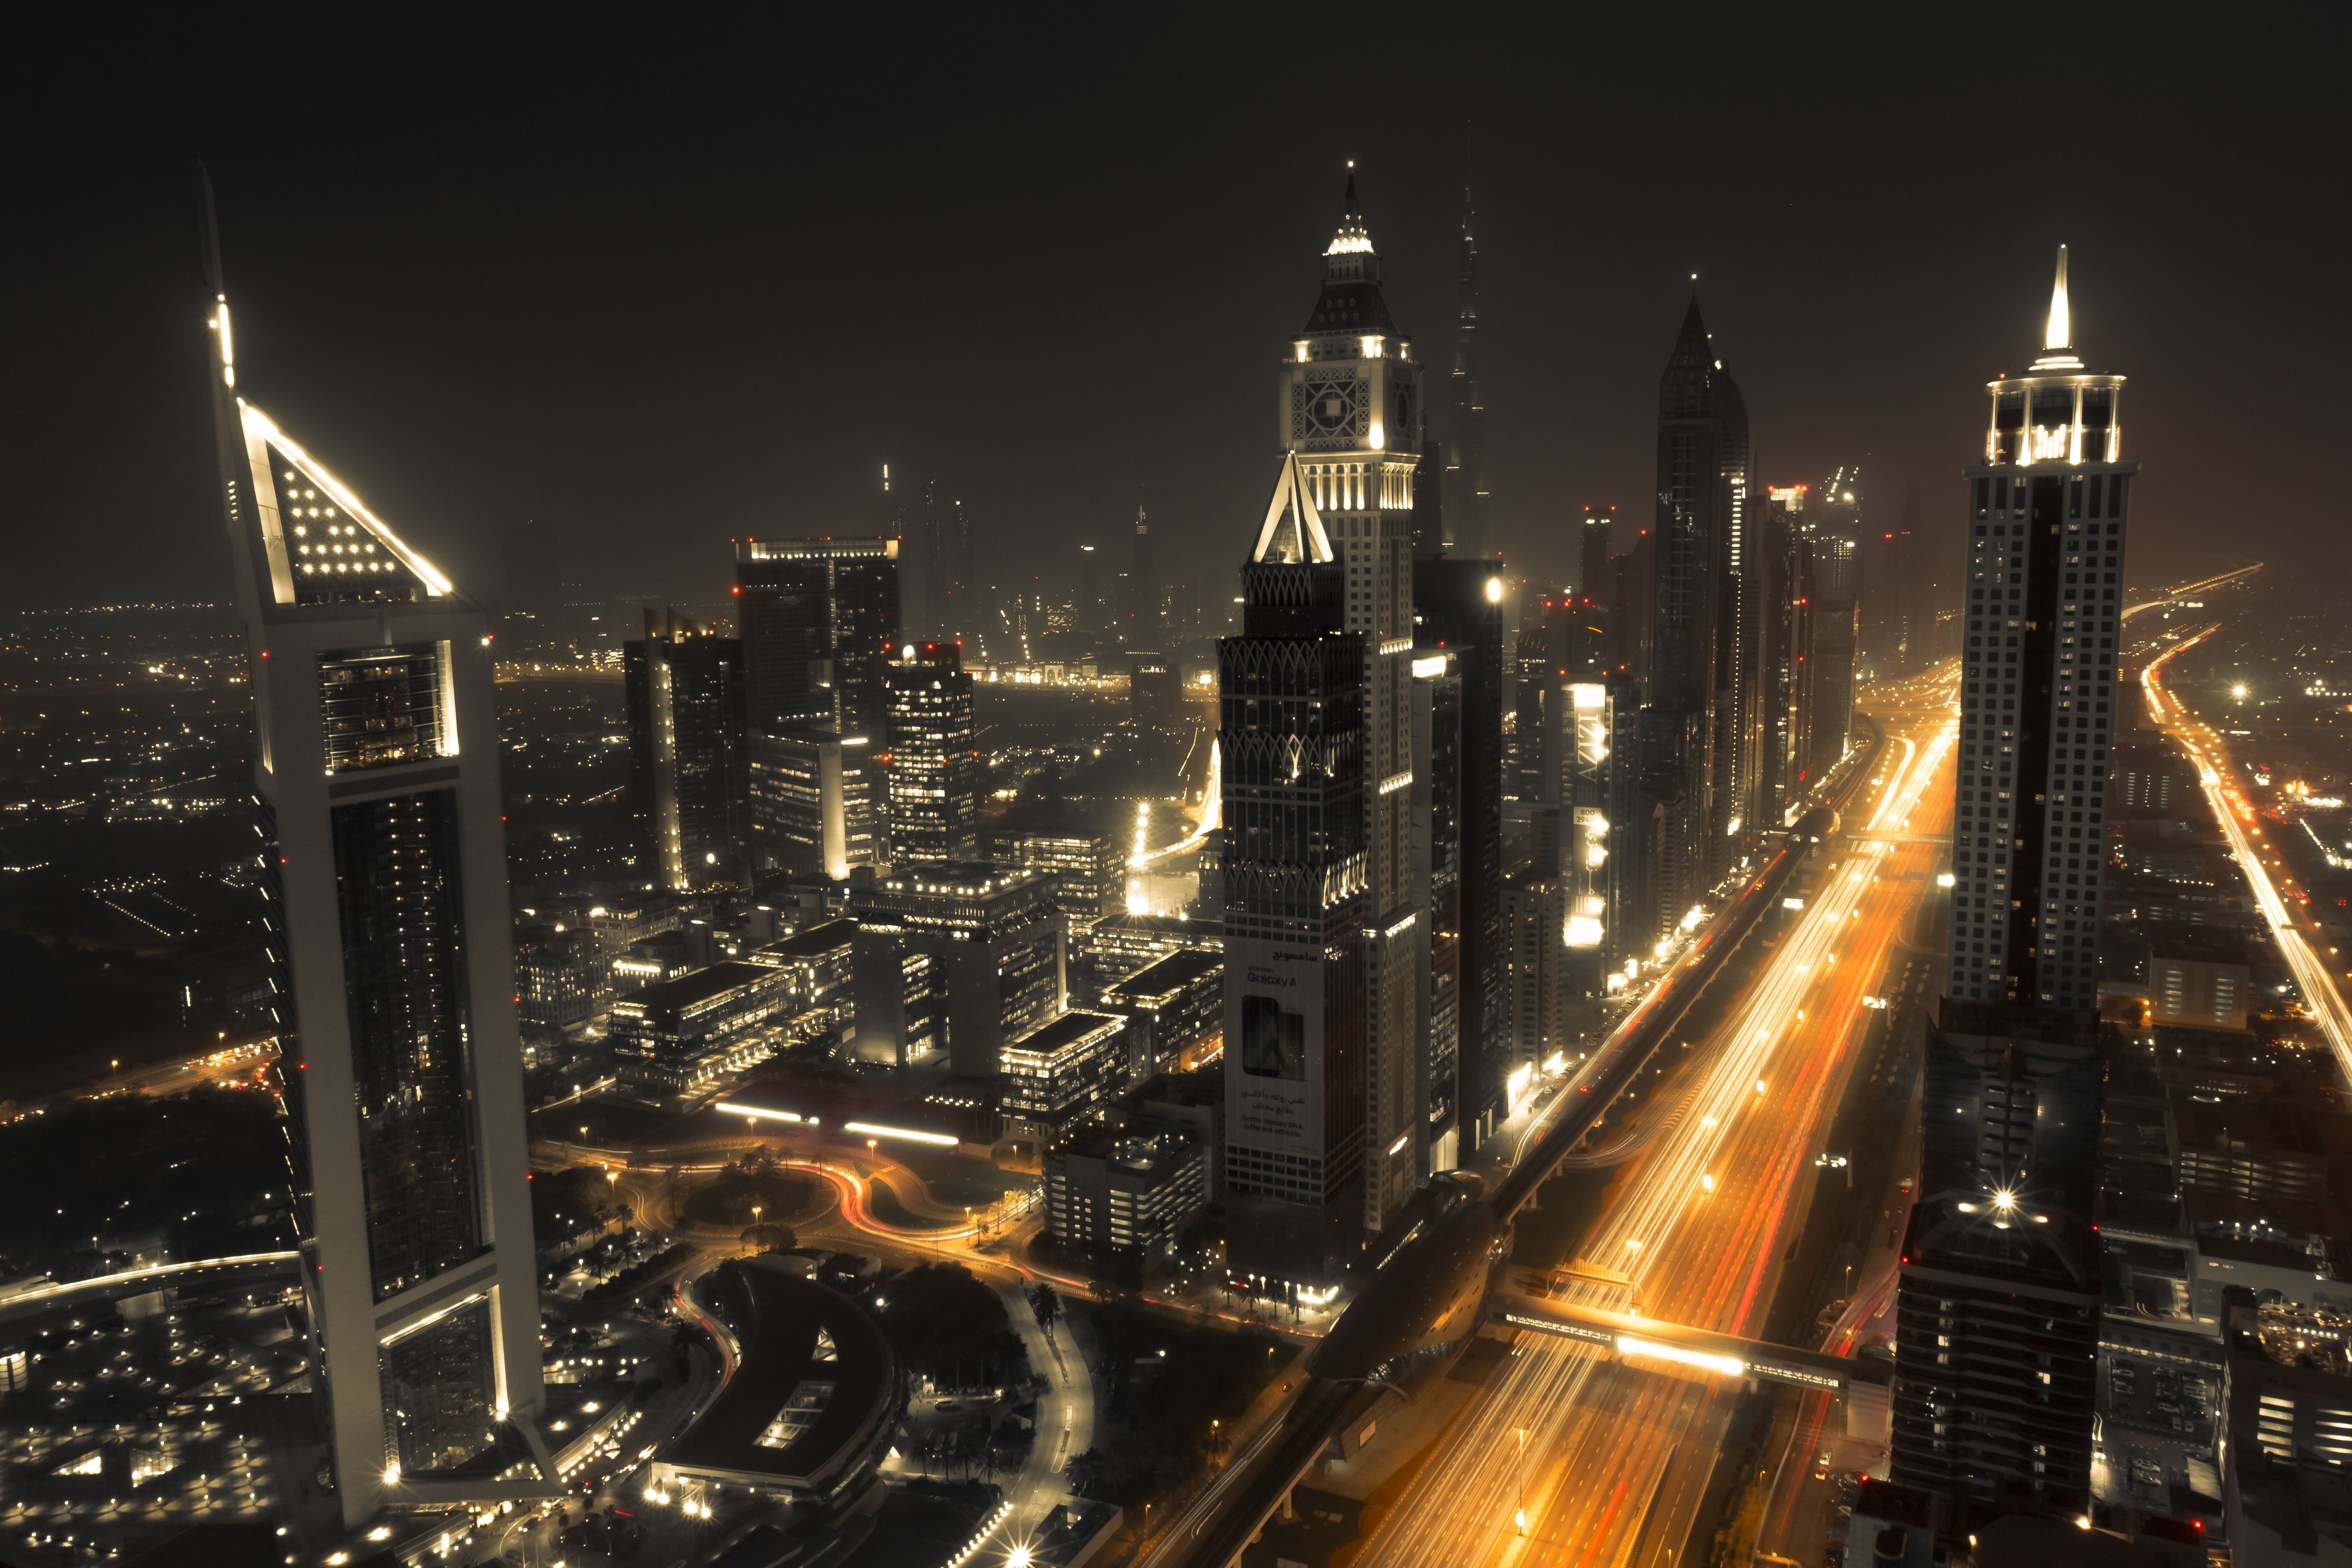 A nighttime view of the city of Dubai, with a long exposure of the highway in the foreground. - Dubai